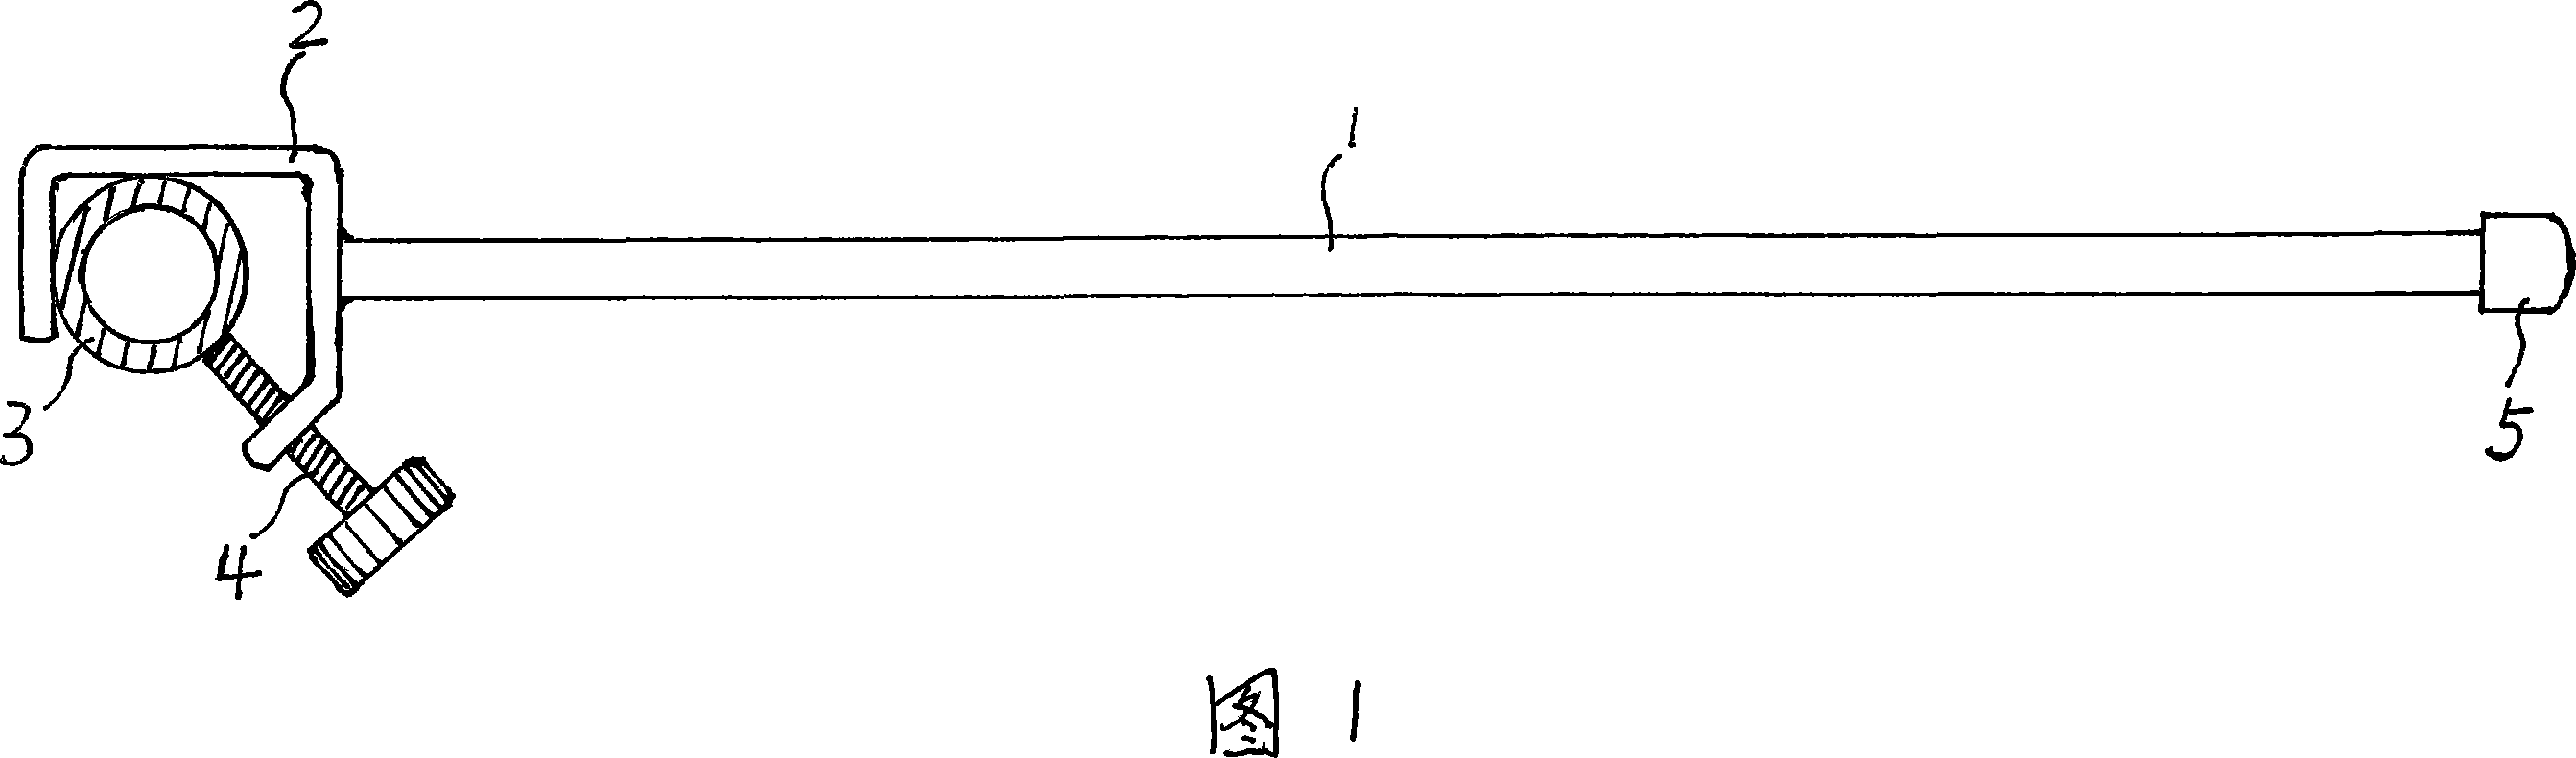 Clothes airing device capable of fastening on vertical rods of different diameters